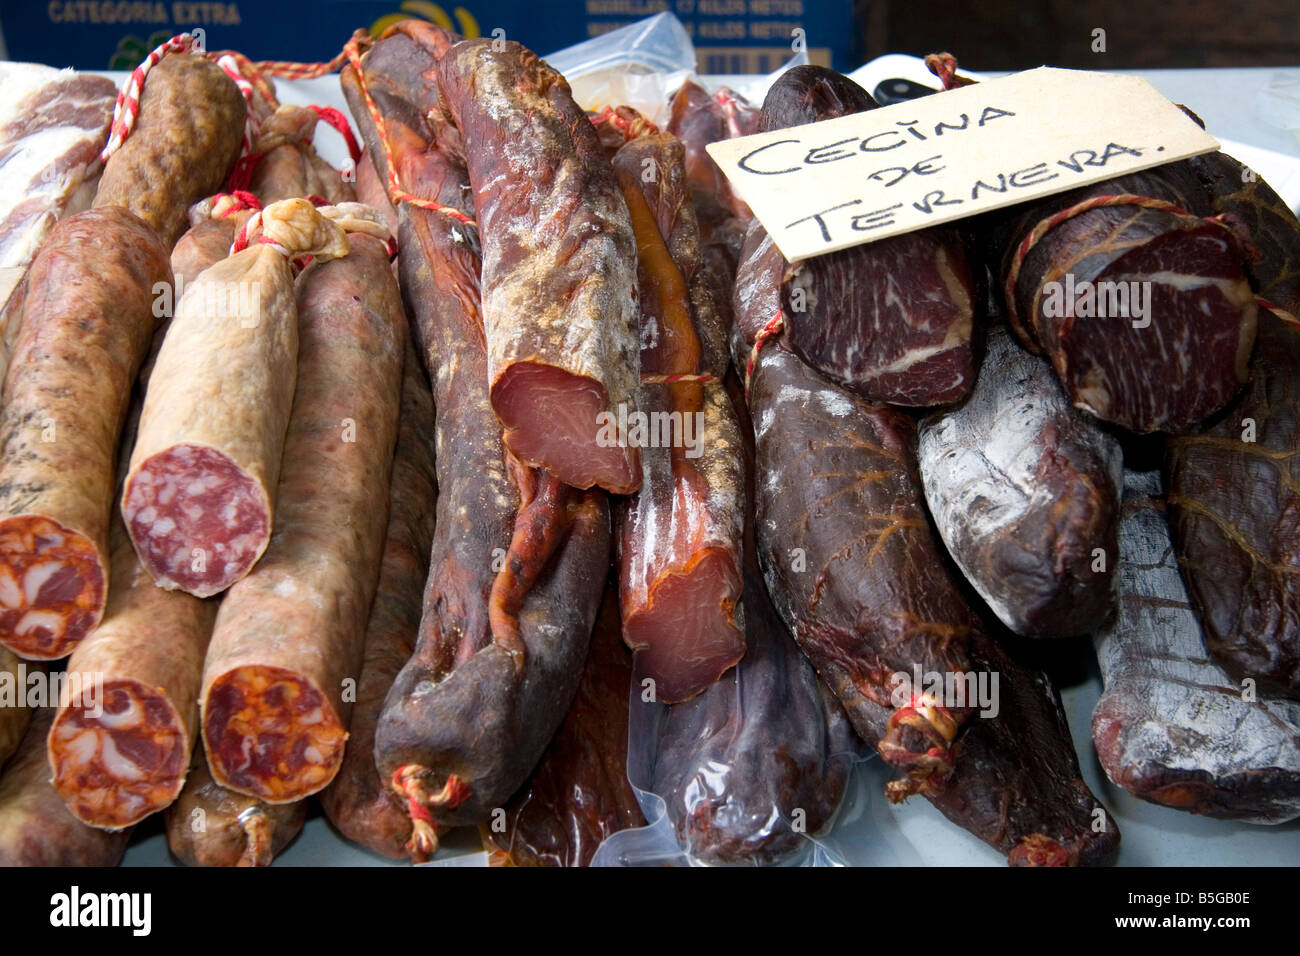 Sausage and cured meat being sold at an outdoor market in the town of Cangas de Onis Asturias northern Spain Stock Photo